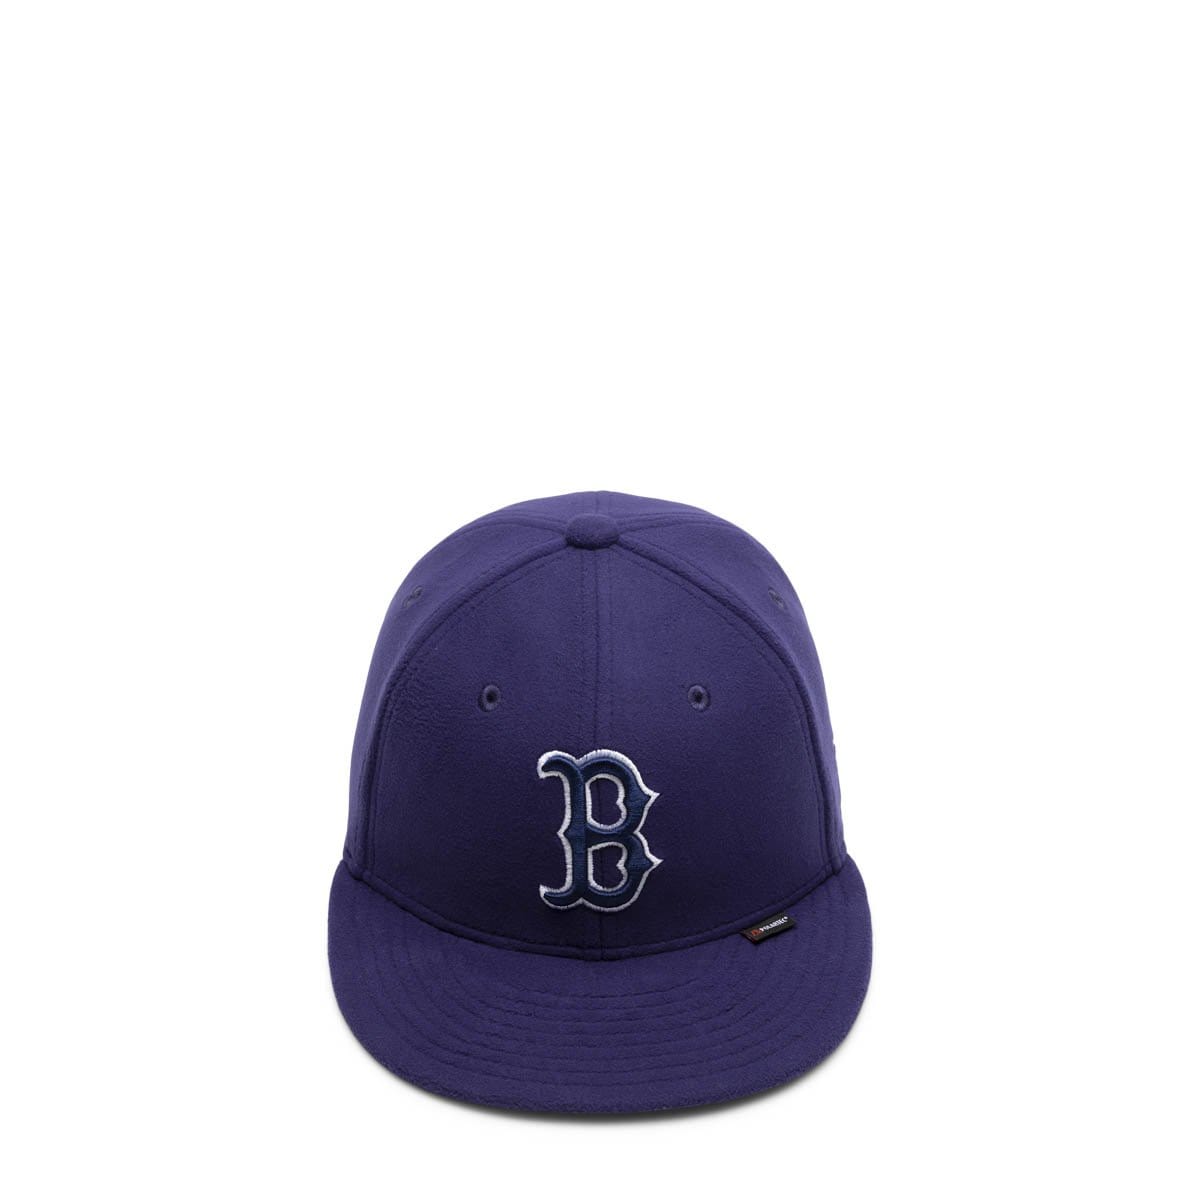 New Era 59FIFTY RED SOX POLARTEC FITTED CAP